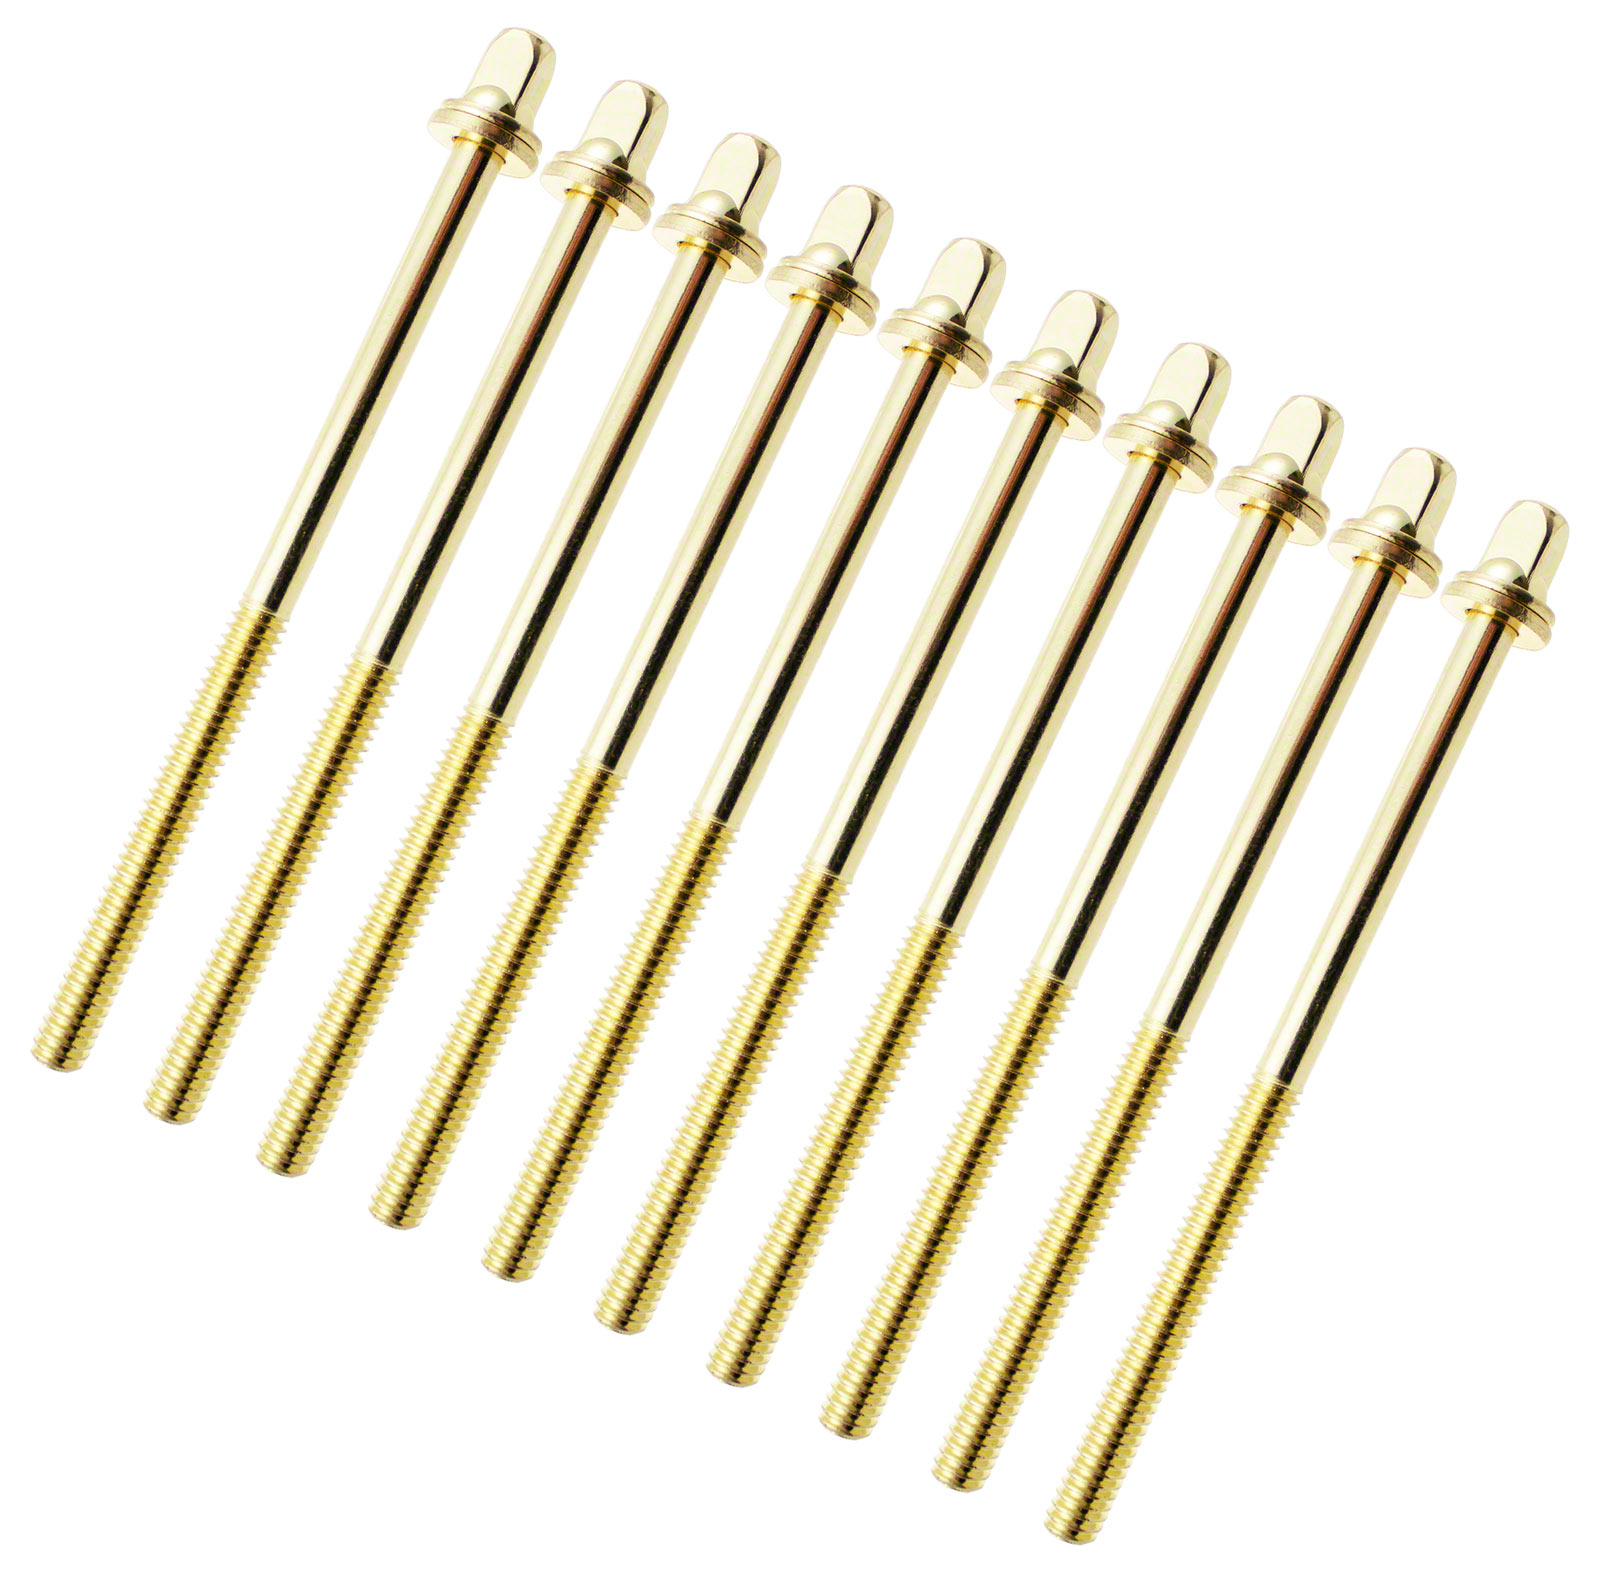 SPAREDRUM TRC-90W-BR - 90MM TENSION ROD BRASS WITH WASHER - 7/32